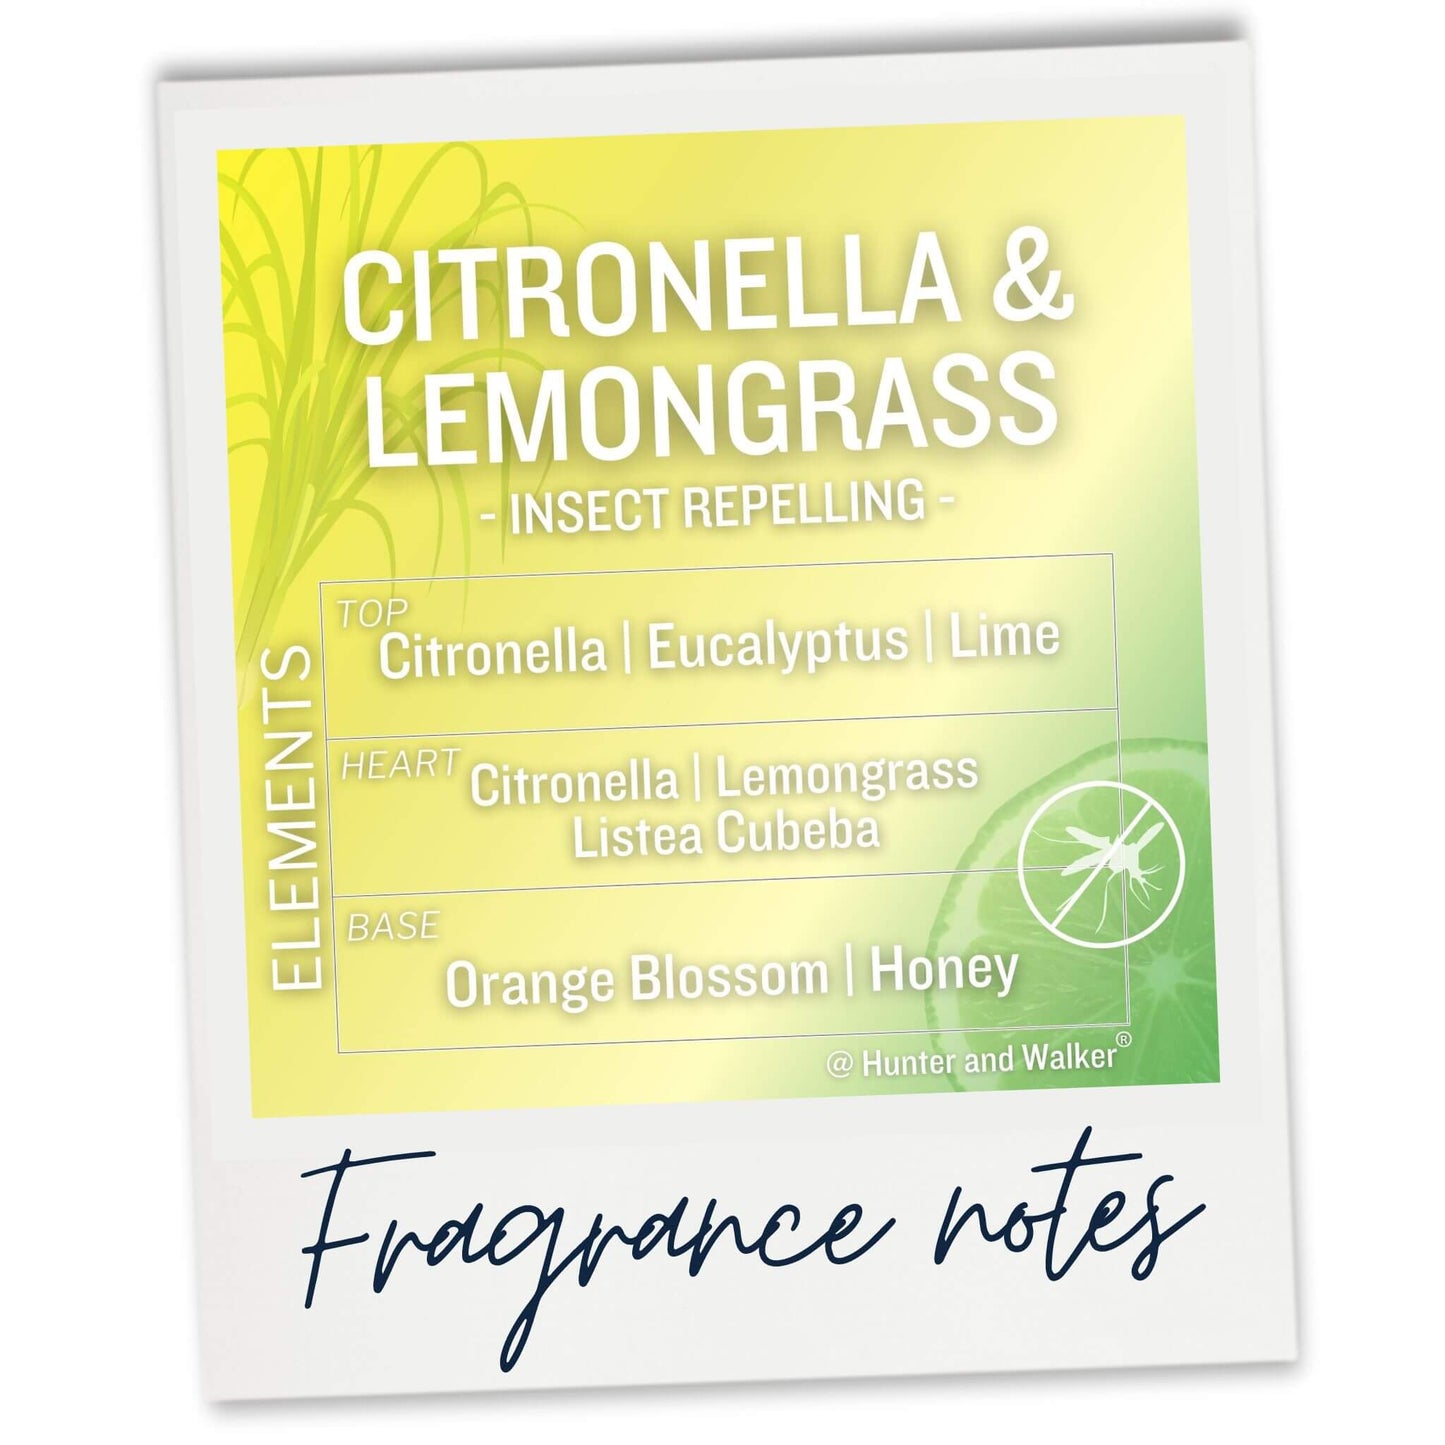 Natural Citronella and Lemongrass insect repelling luxury wax melt fragrance notes